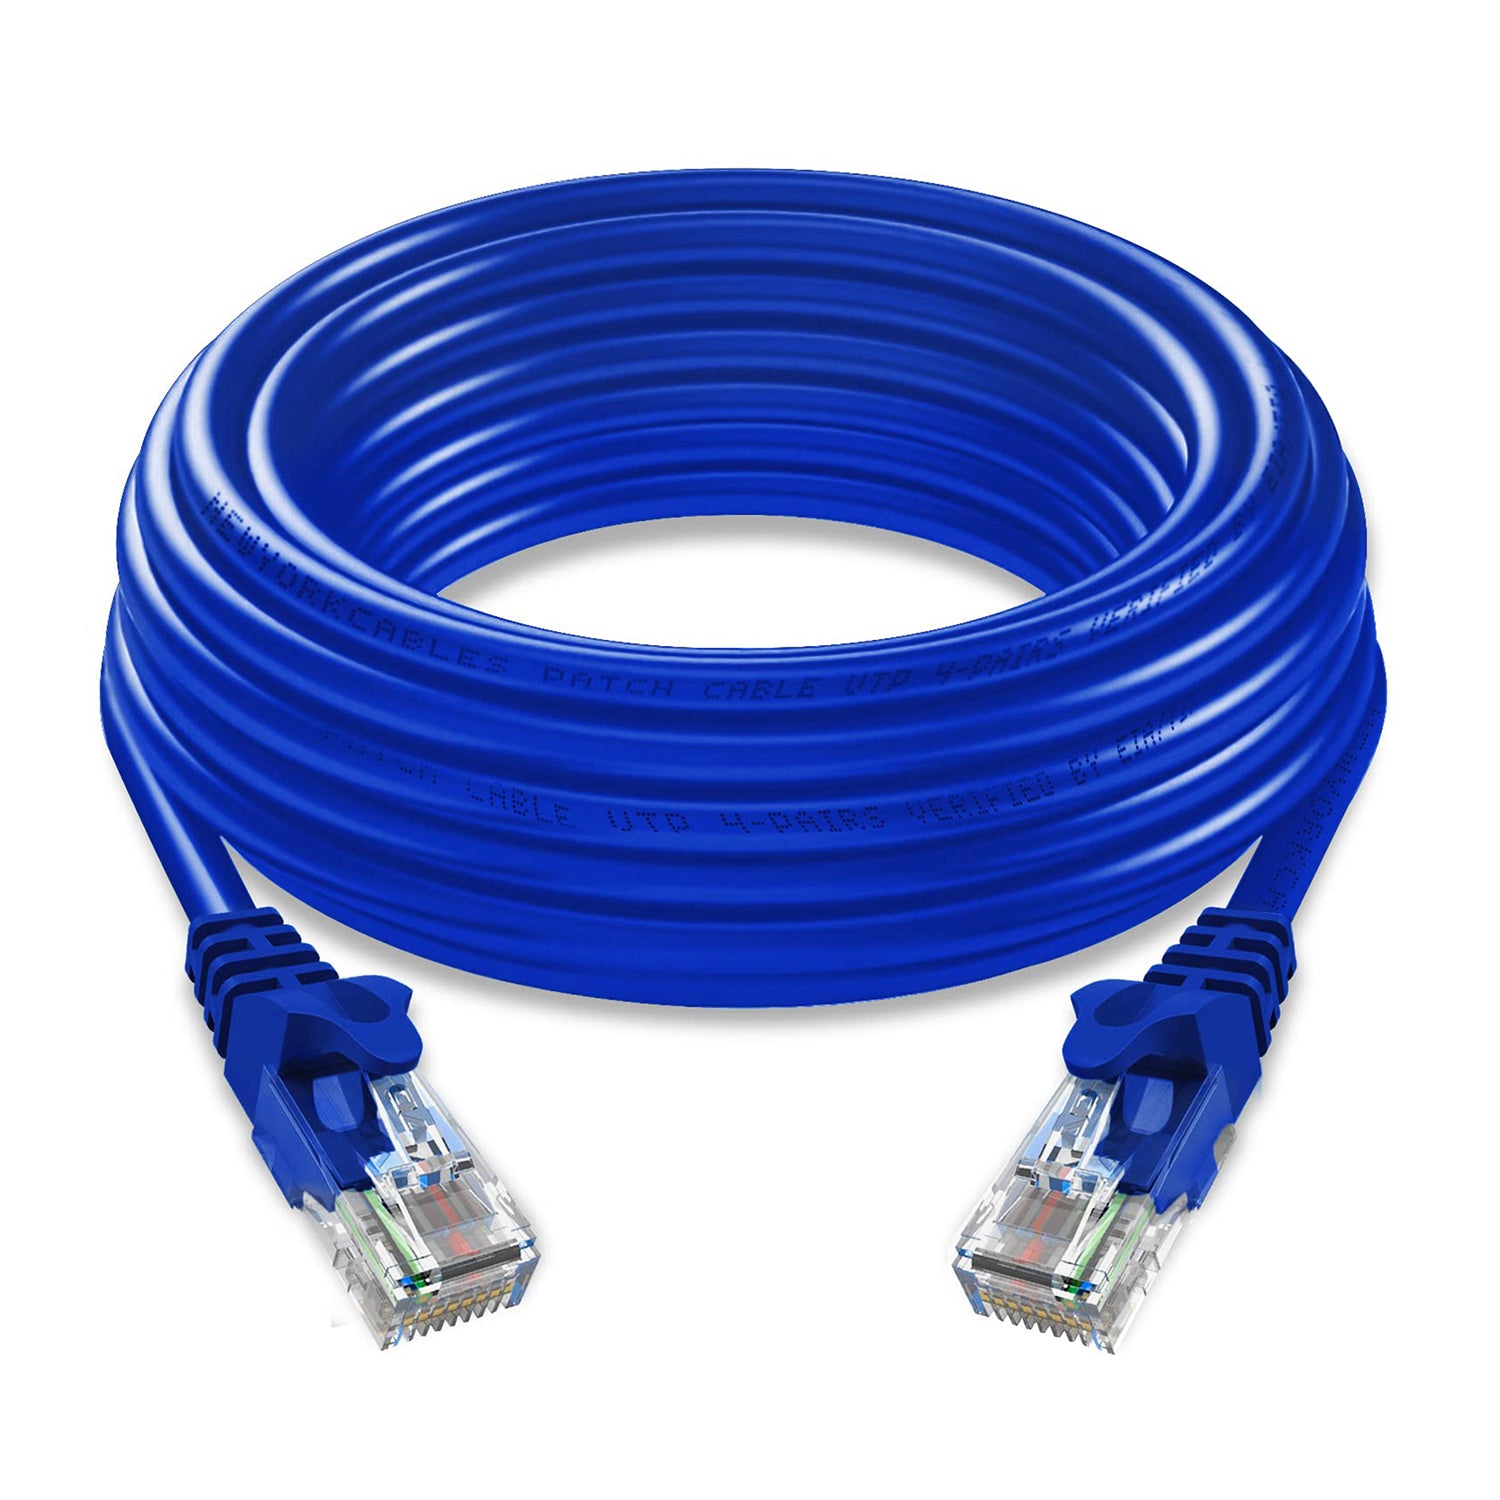 5 Core Cat 6 Ethernet Cable 10Gbps Network Patch Cord RJ45 Internet LAN Cable 1.5/3/6/10/15/20/30 ft